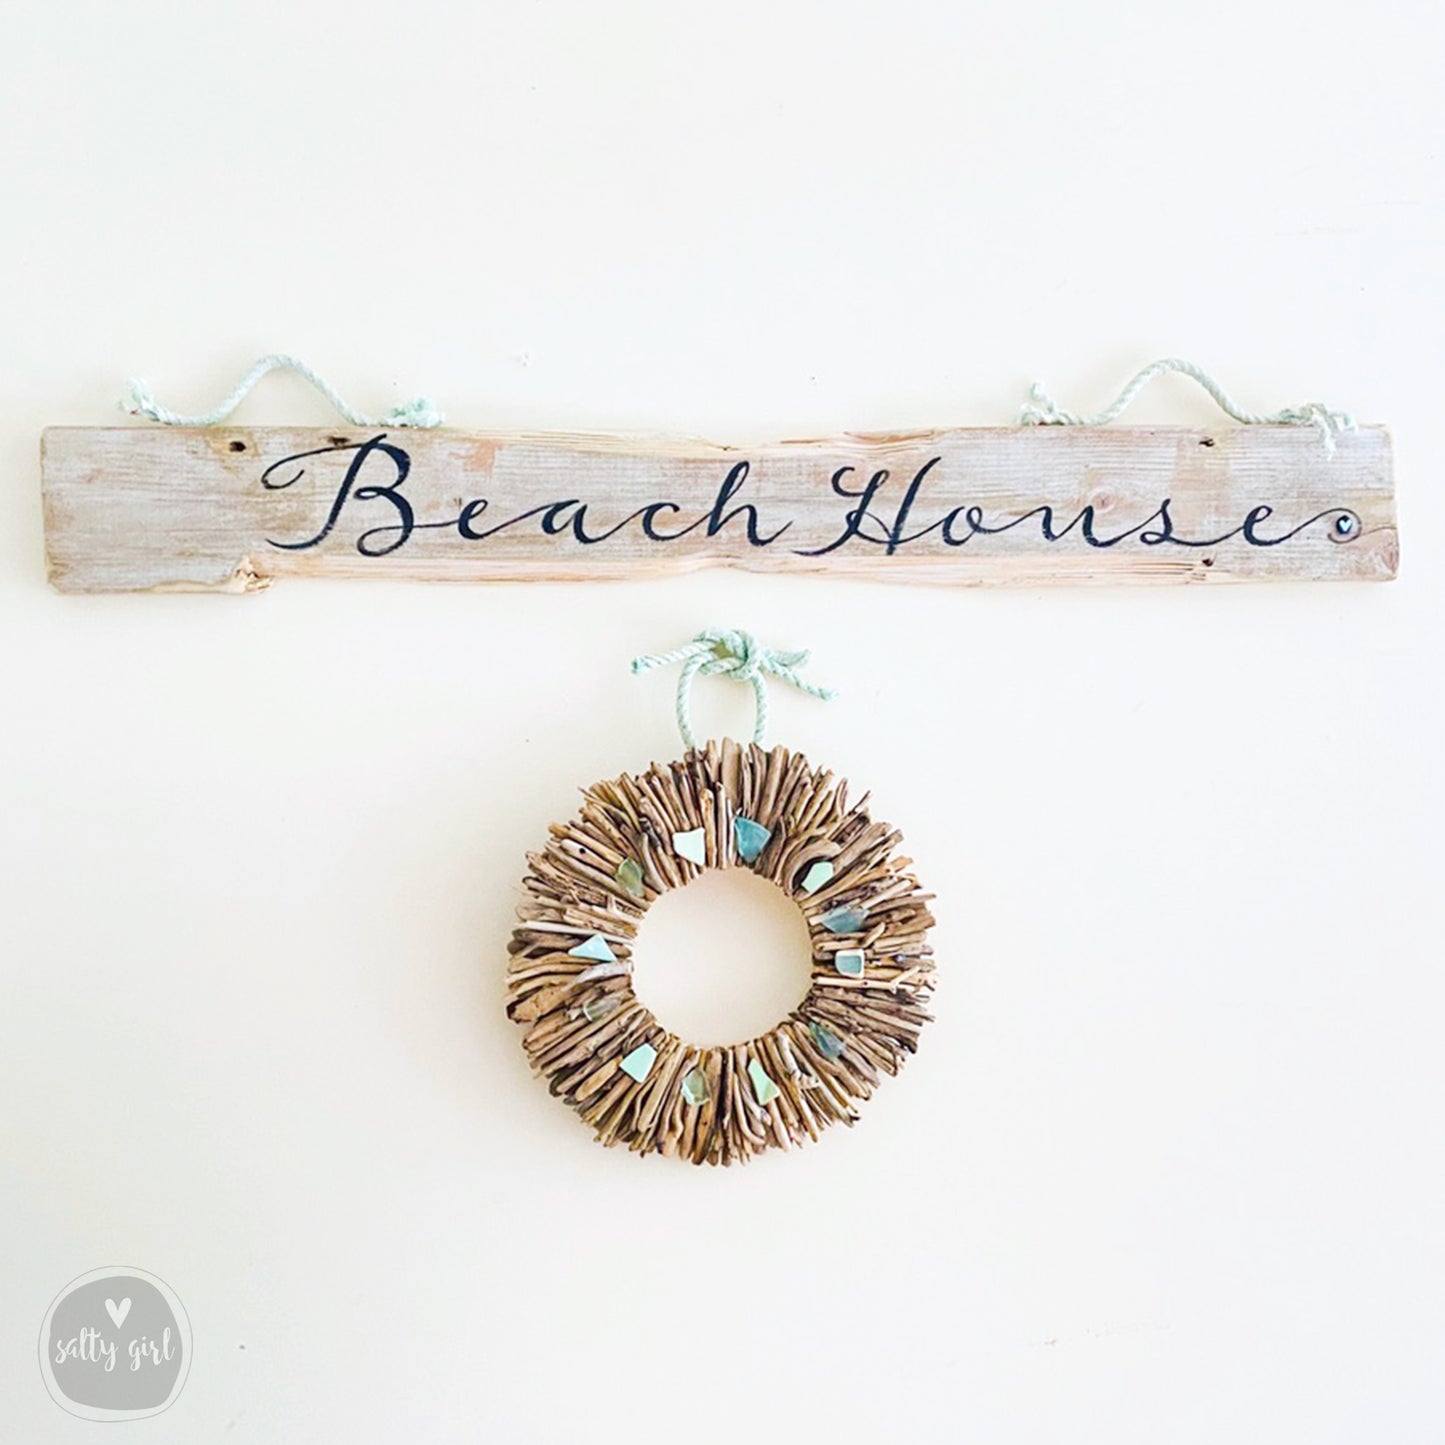 a wooden sign that says beach house with a wreath hanging from it